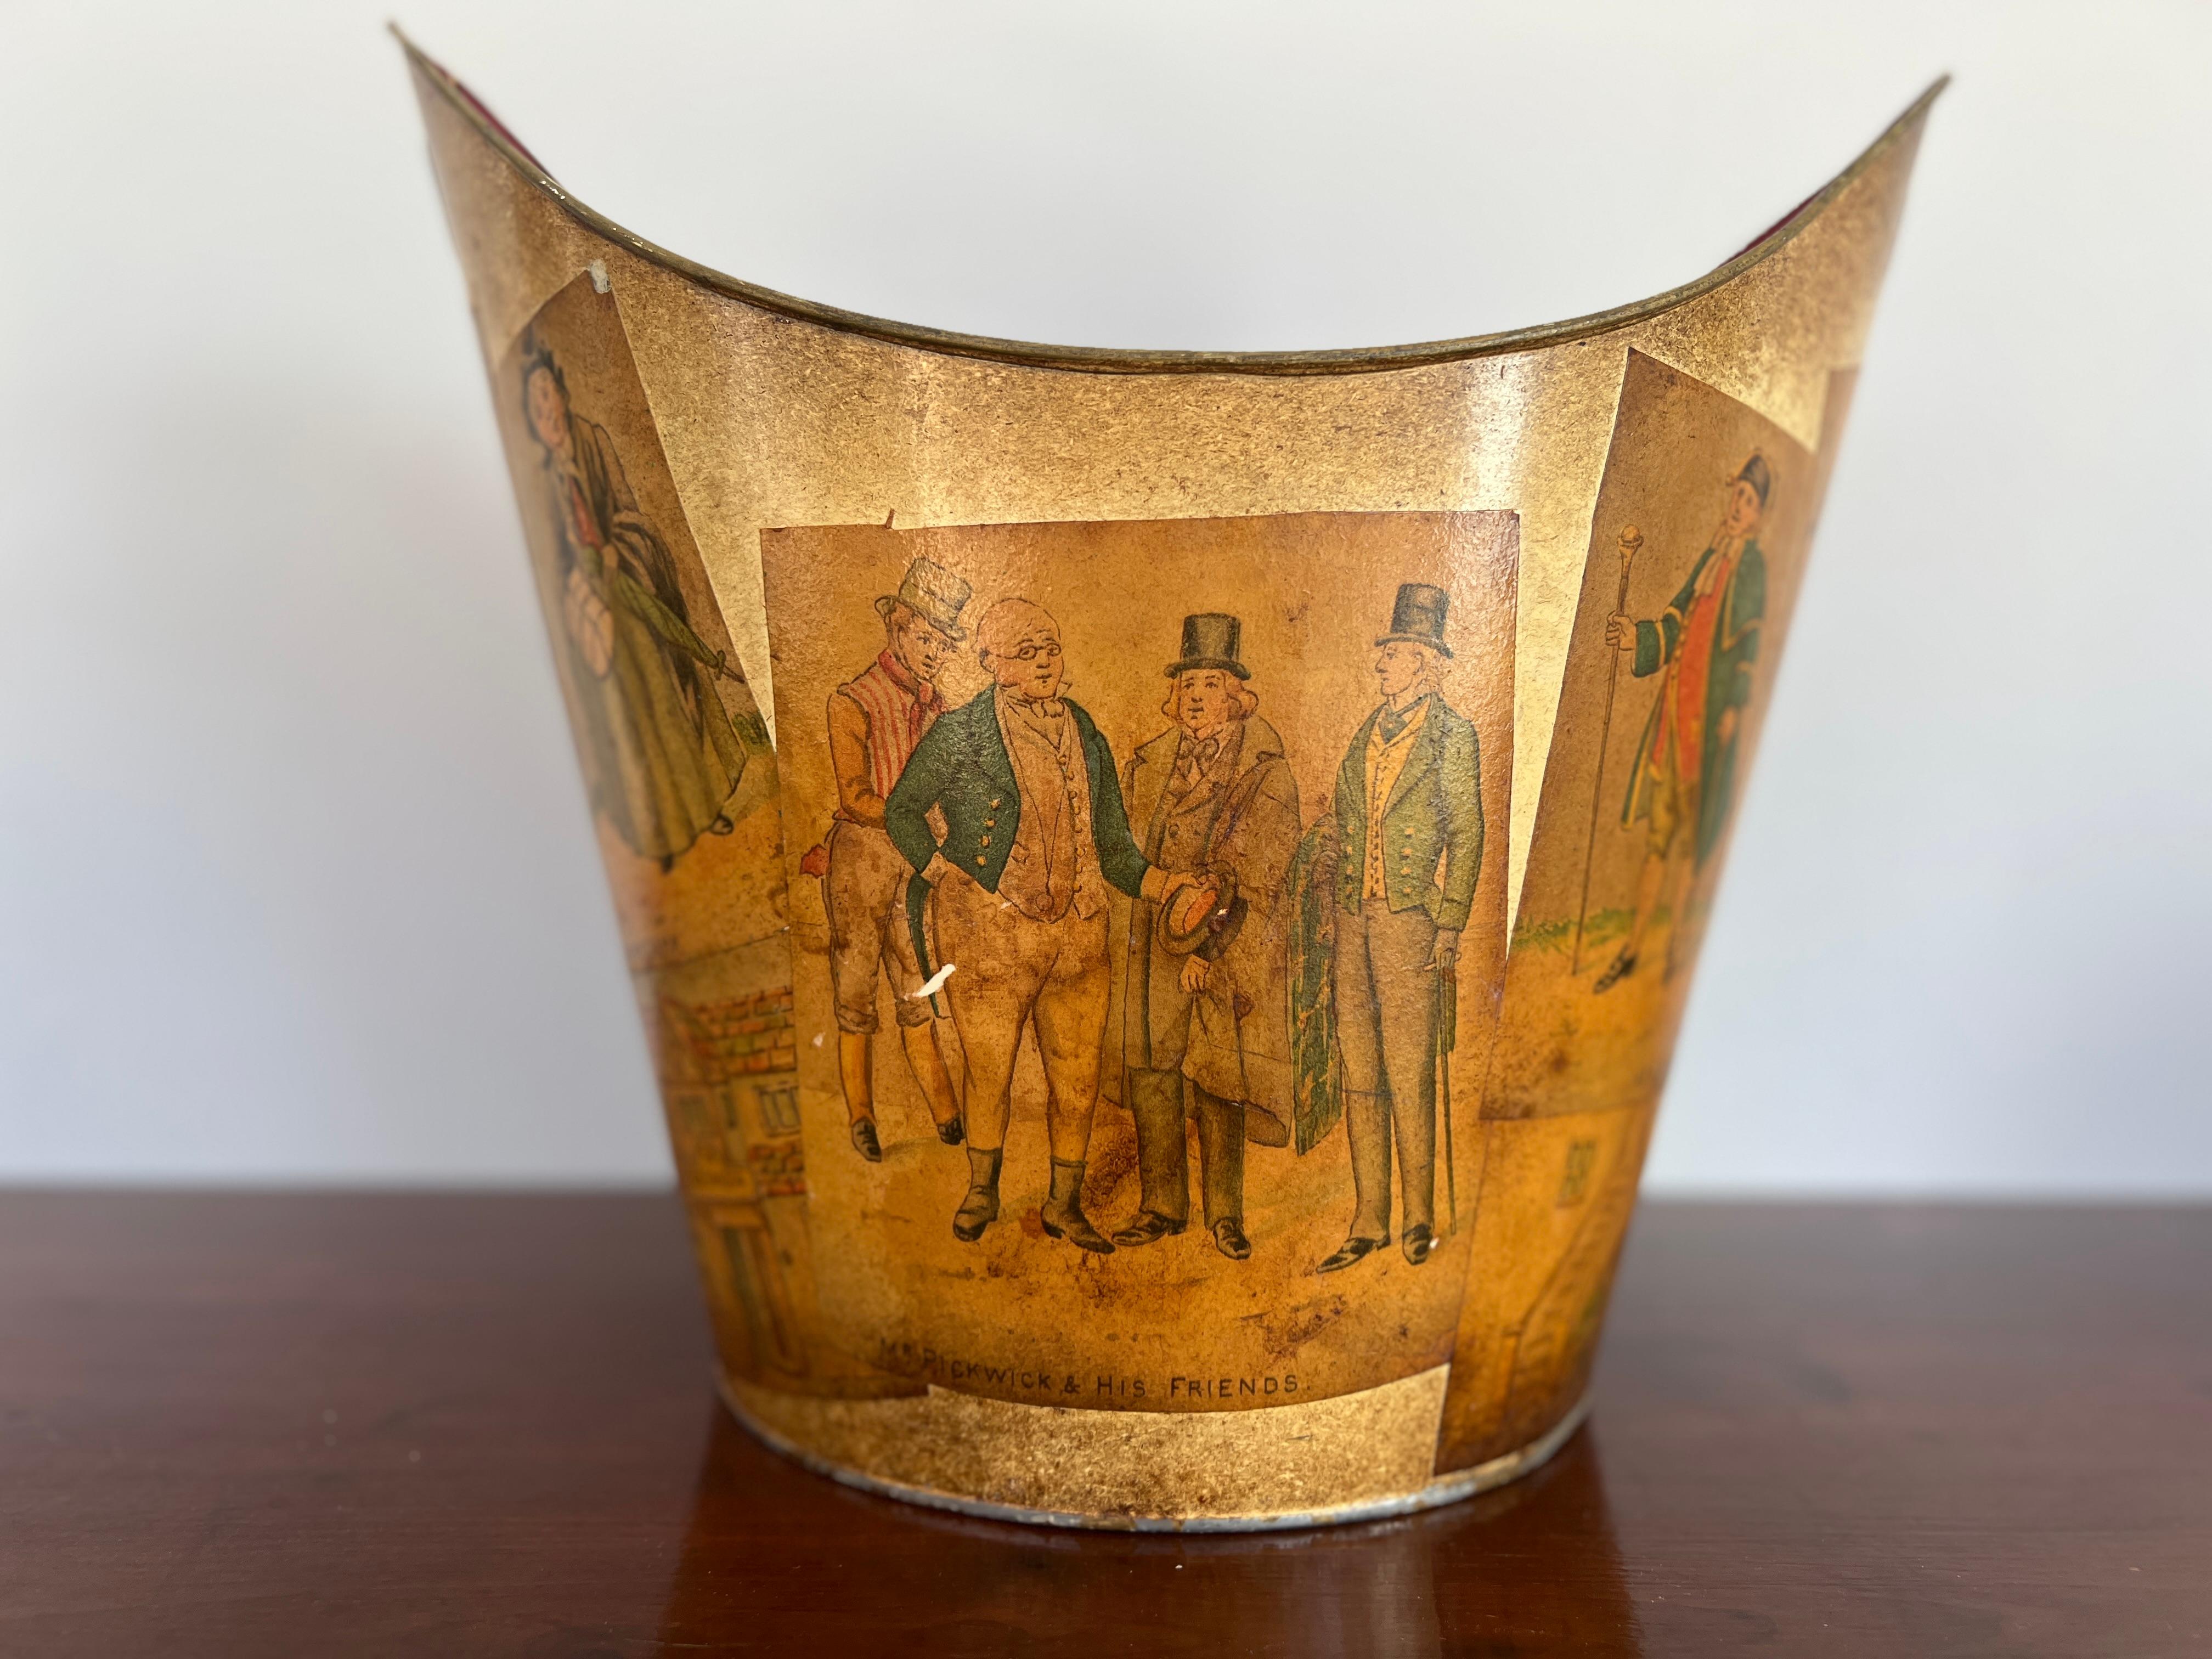 Italian, early to mid 20th century.

A vintage yellow tole bucket or trash can adorned with paper mache Mr. Pickwick & Friends decorations to exterior and a red interior. Otherwise unmarked.